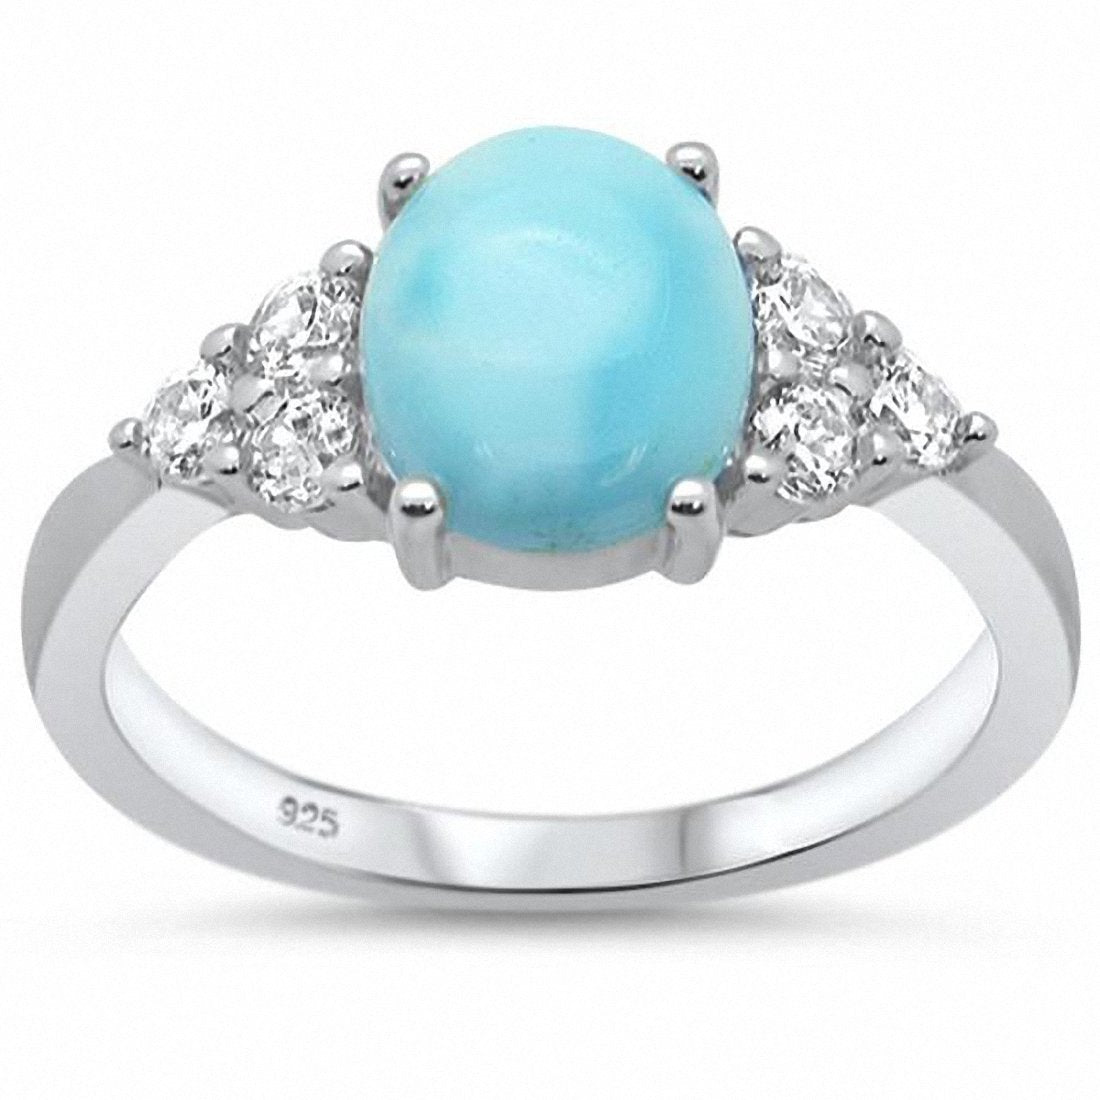 Petite Dainty Solitaire Ring Round Simulated Larimar 925 Sterling Silver